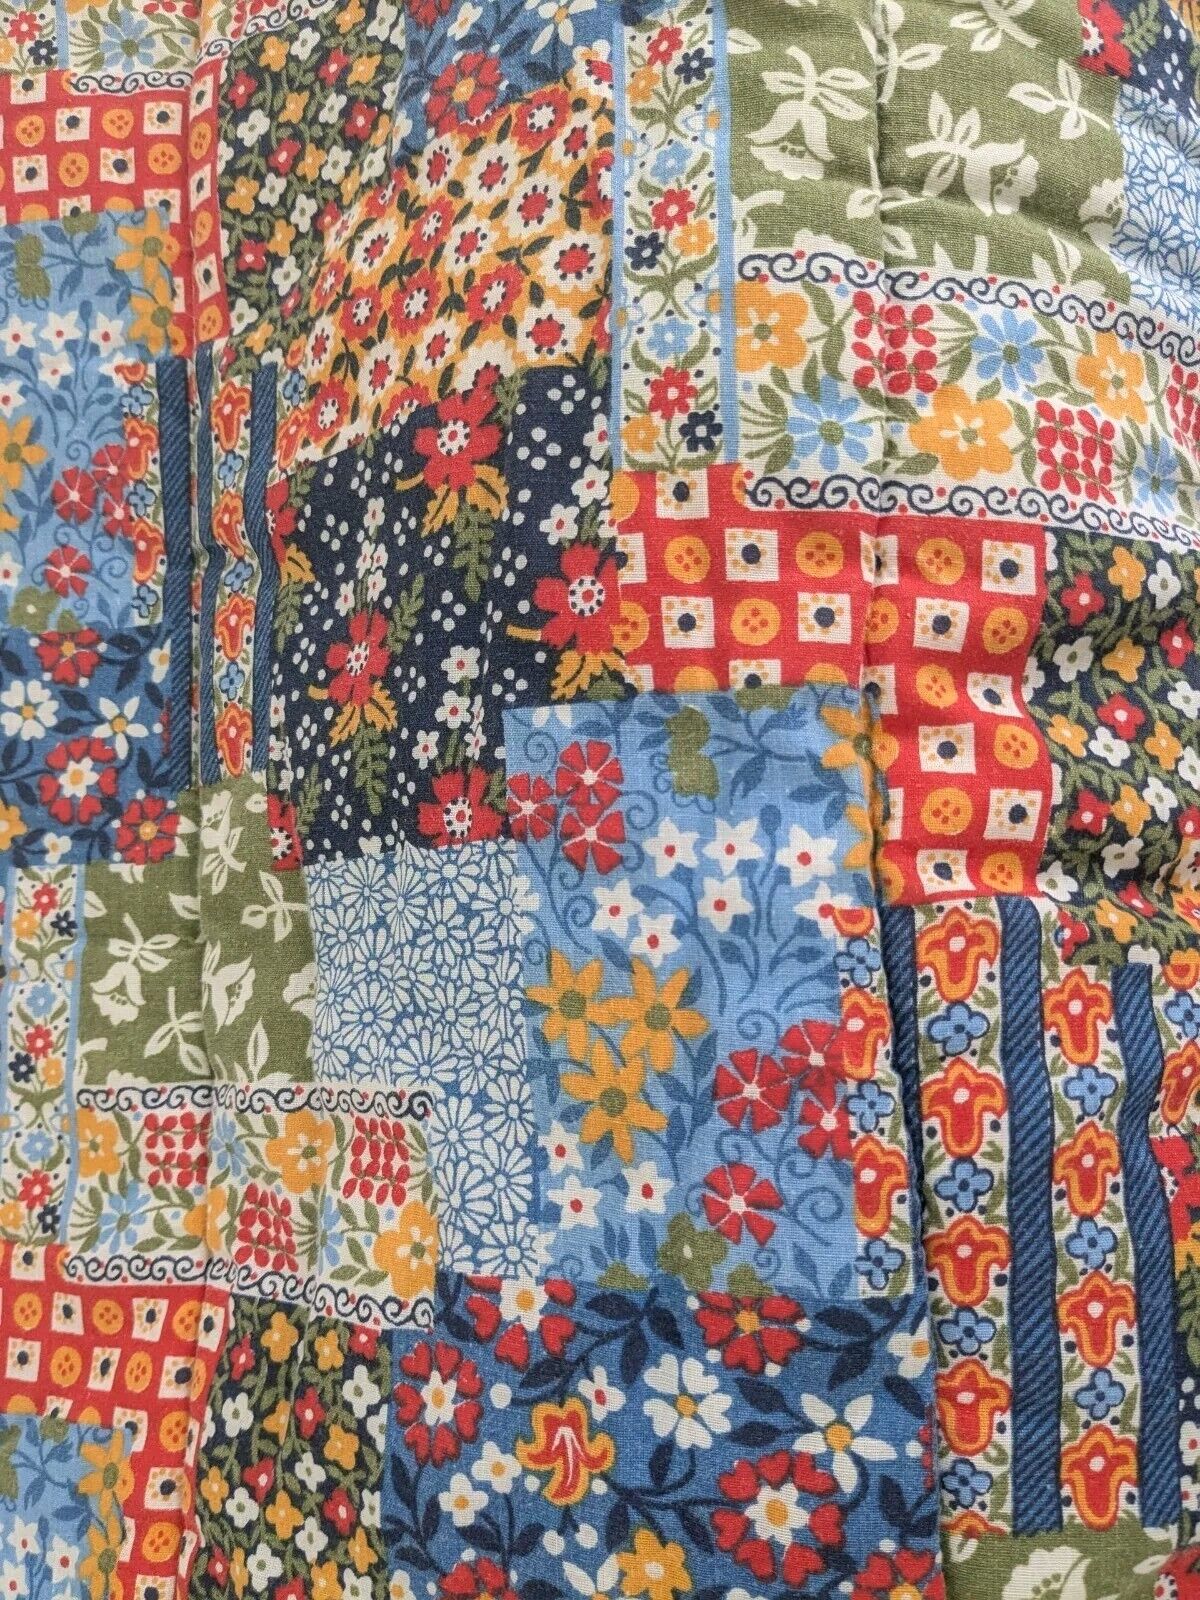 Vtg 70s Patchwork Print Sleeping Bag Retro Floral Quilted Fabric Cutter No Snaps